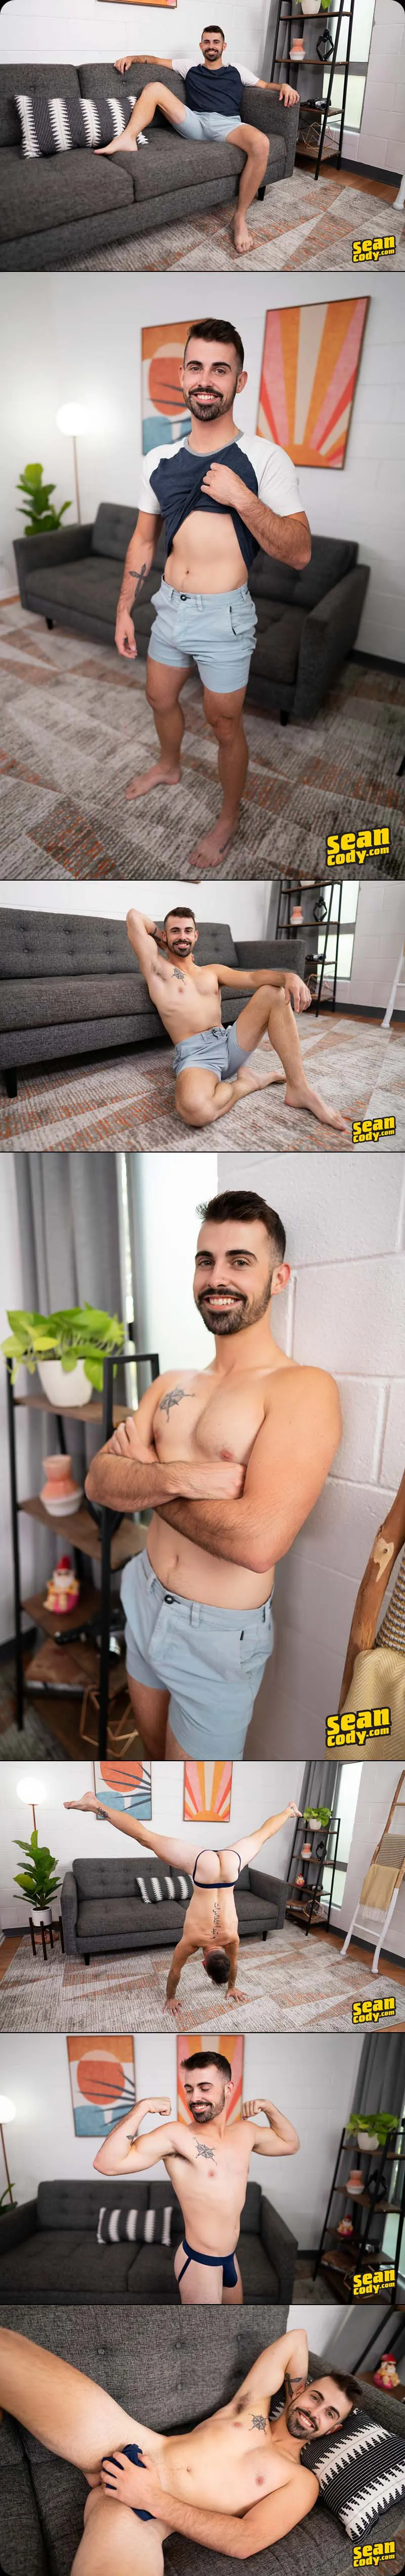 Dax [Introductory Solo] at SeanCody